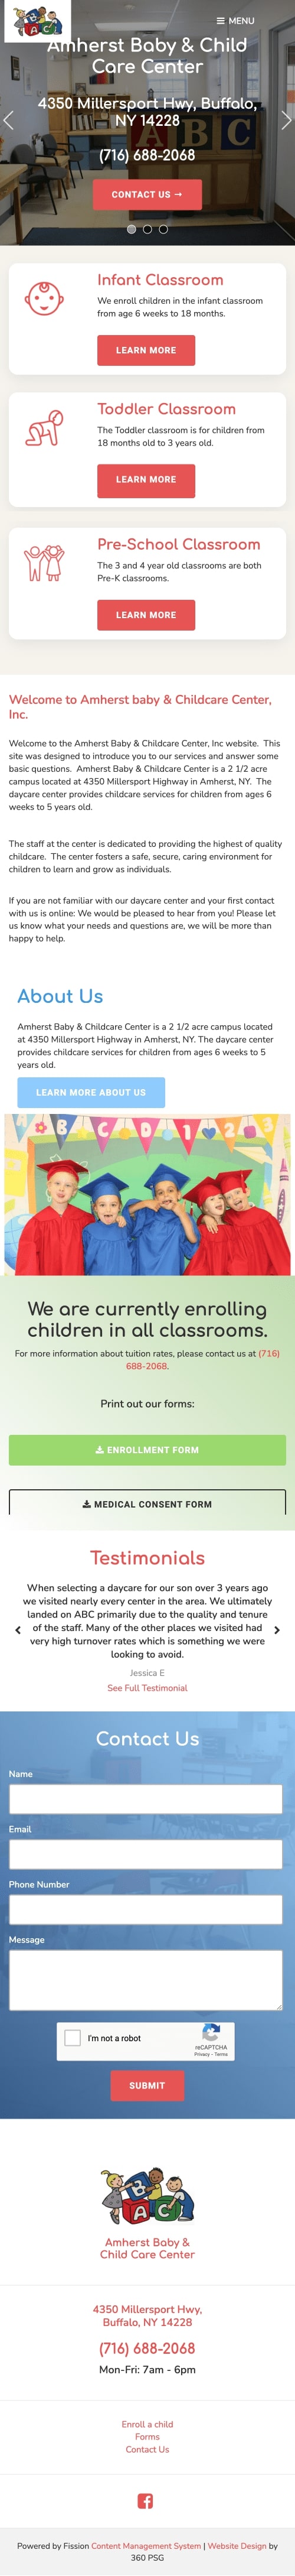 Amherst Baby and Child Care Center Website - Mobile